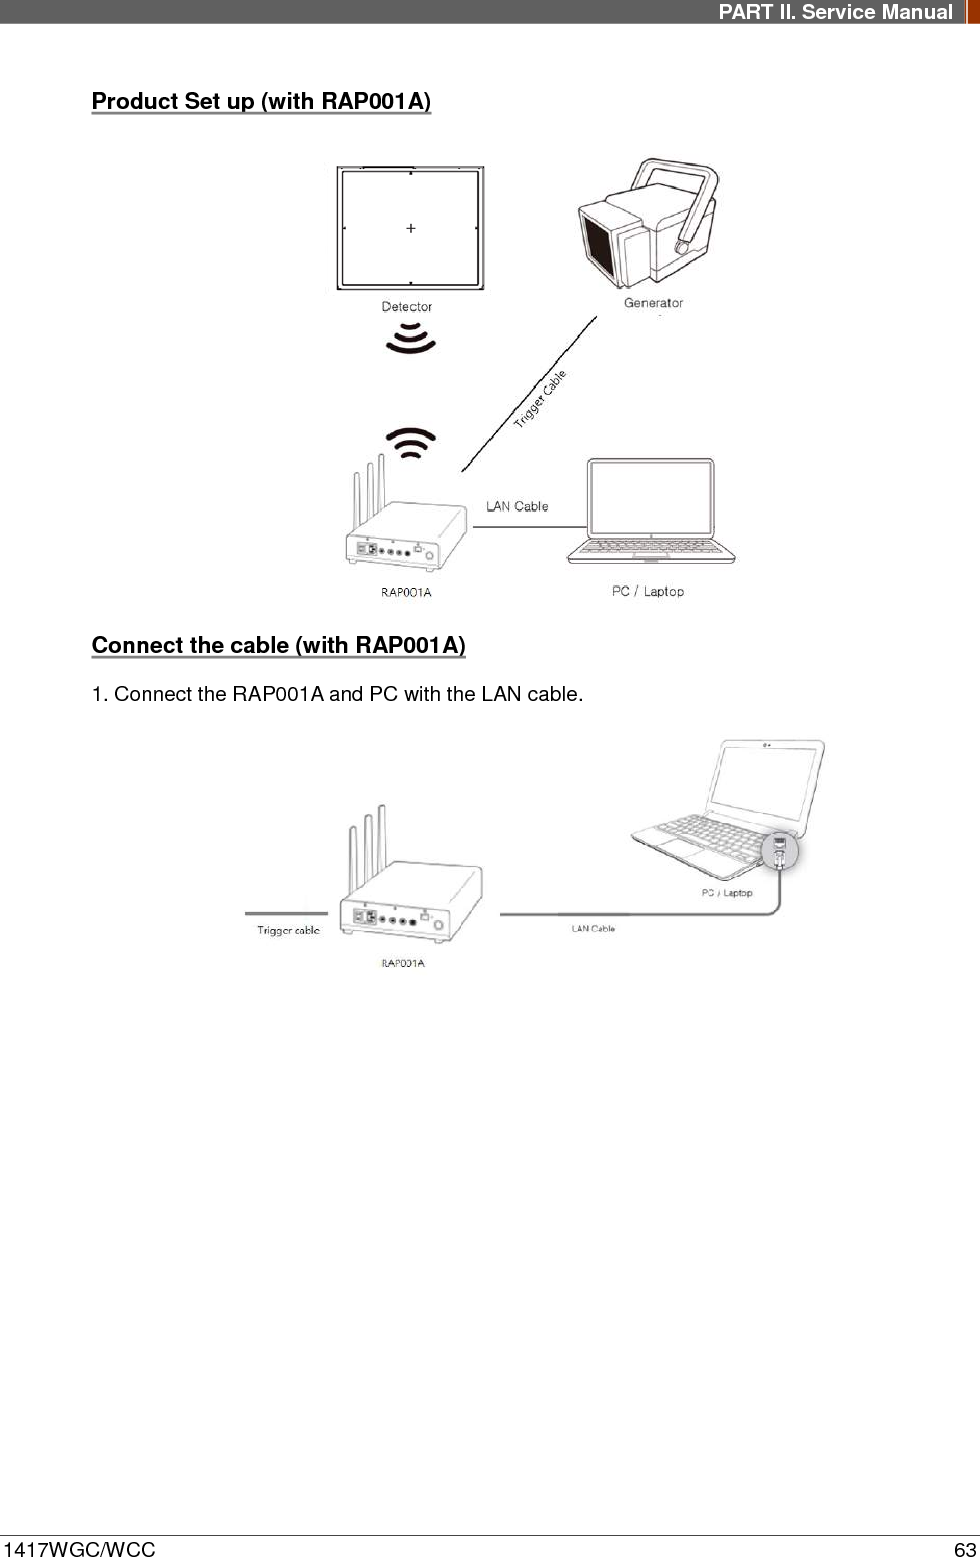 PART II. Service Manual  1417WGC/WCC 63 Product Set up (with RAP001A)  Connect the cable (with RAP001A) 1. Connect the RAP001A and PC with the LAN cable.    